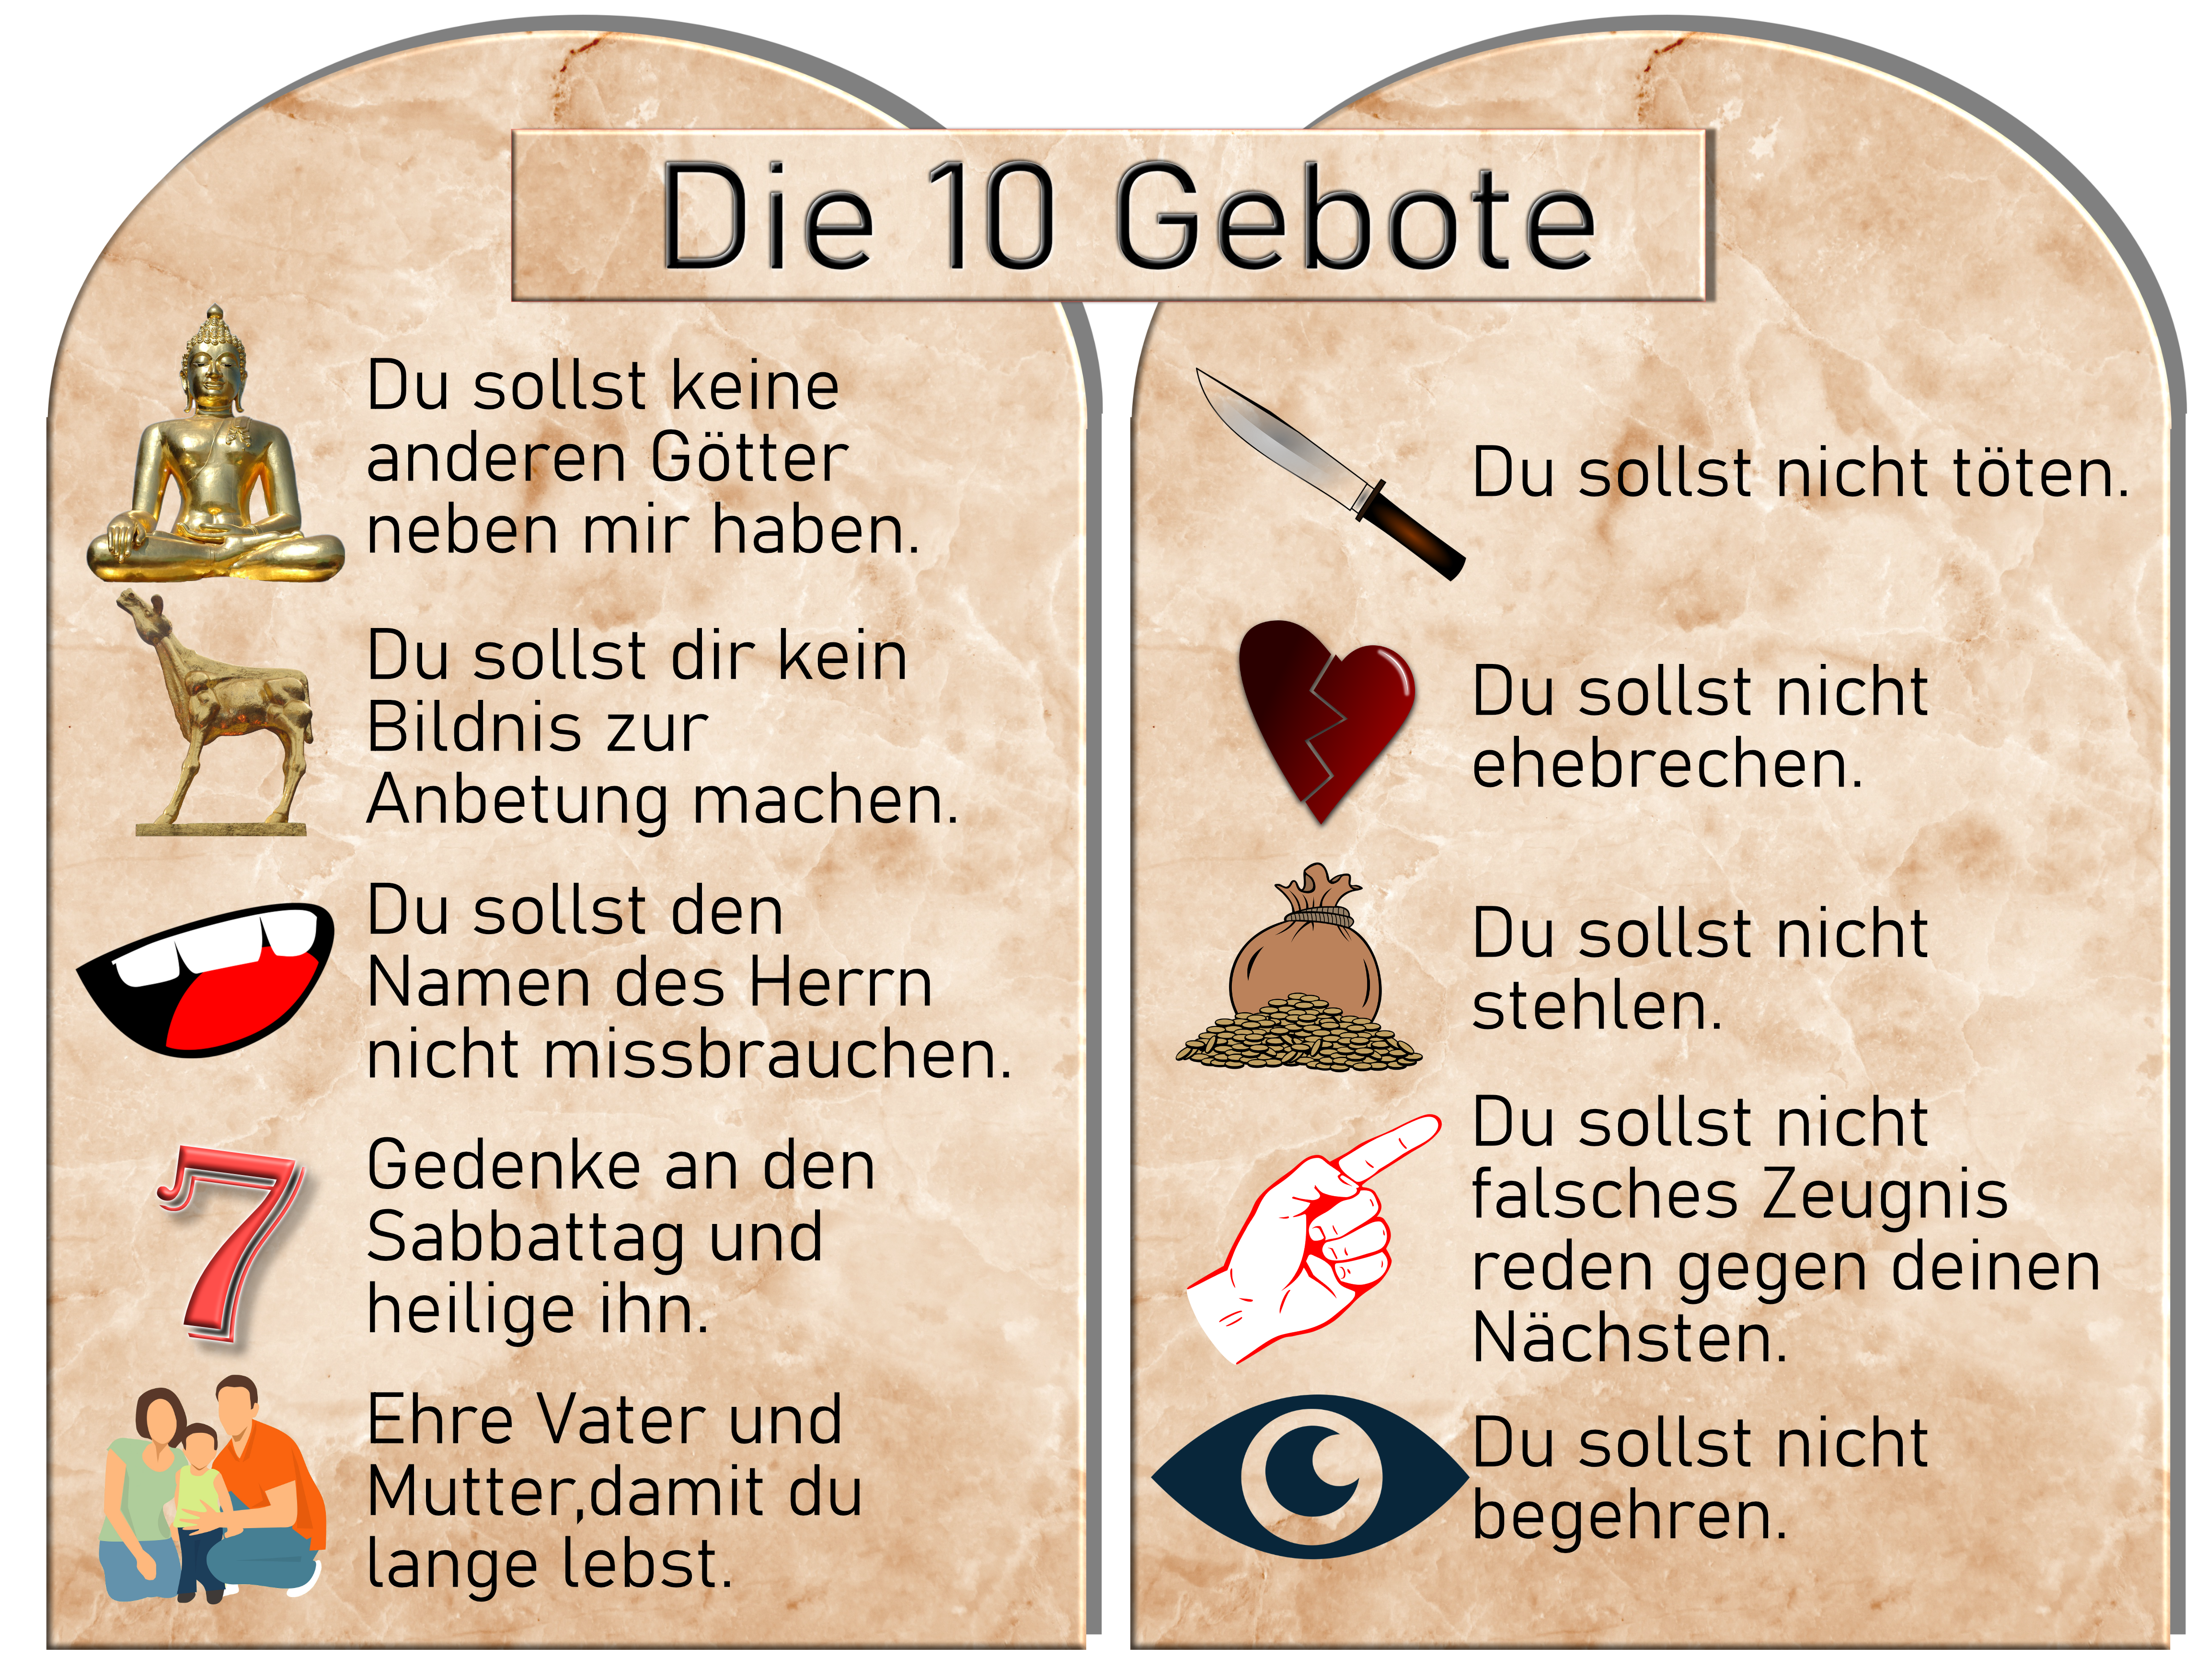 10 Bier Gebote: The Path to Ecstasy and Fulfillment